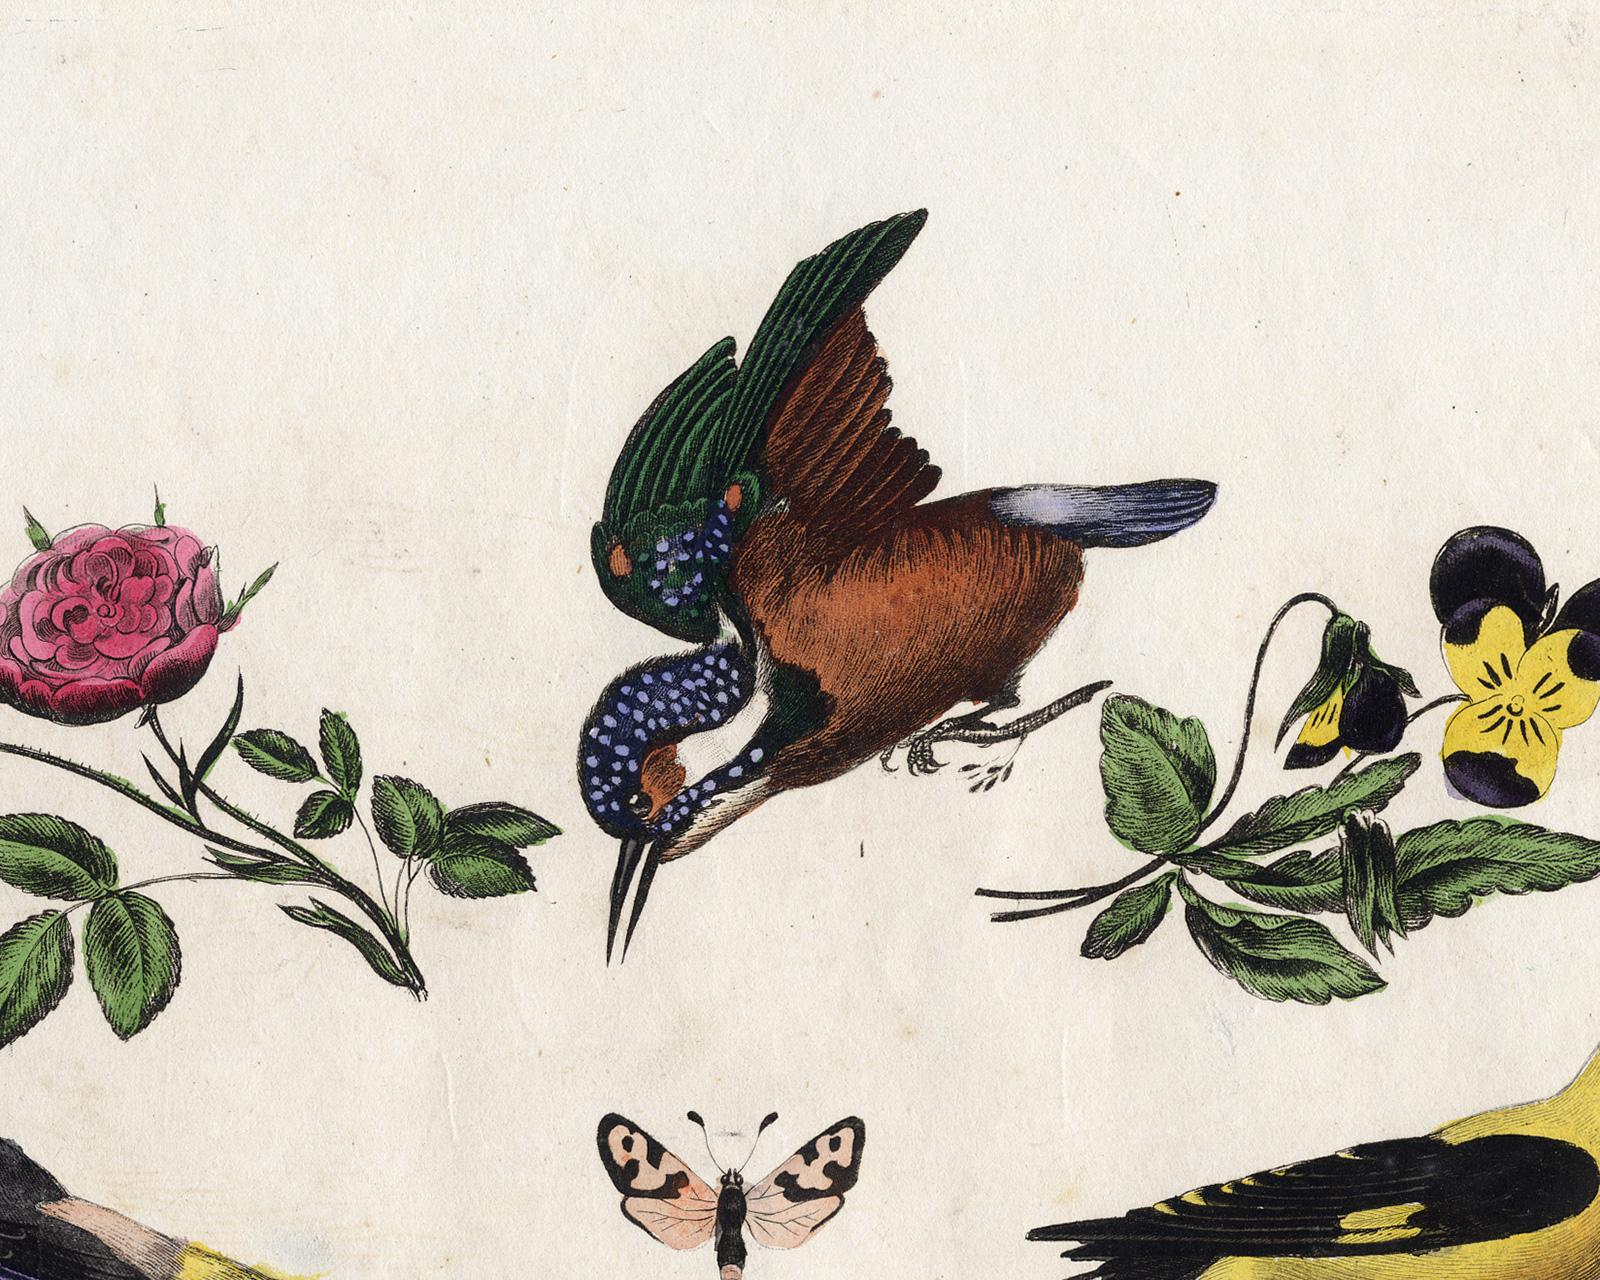 Subject: Plate 4: 1. Martin-Pecheur. - 2. Septicolor. - 3. Loriot.' (1. Kingfisher. - 2. Paradise Tanager  3. Oriole.) With a rose, vila and a butterfly / moth.

Description:  This delicate plate originates from an unknown work or series of plates.